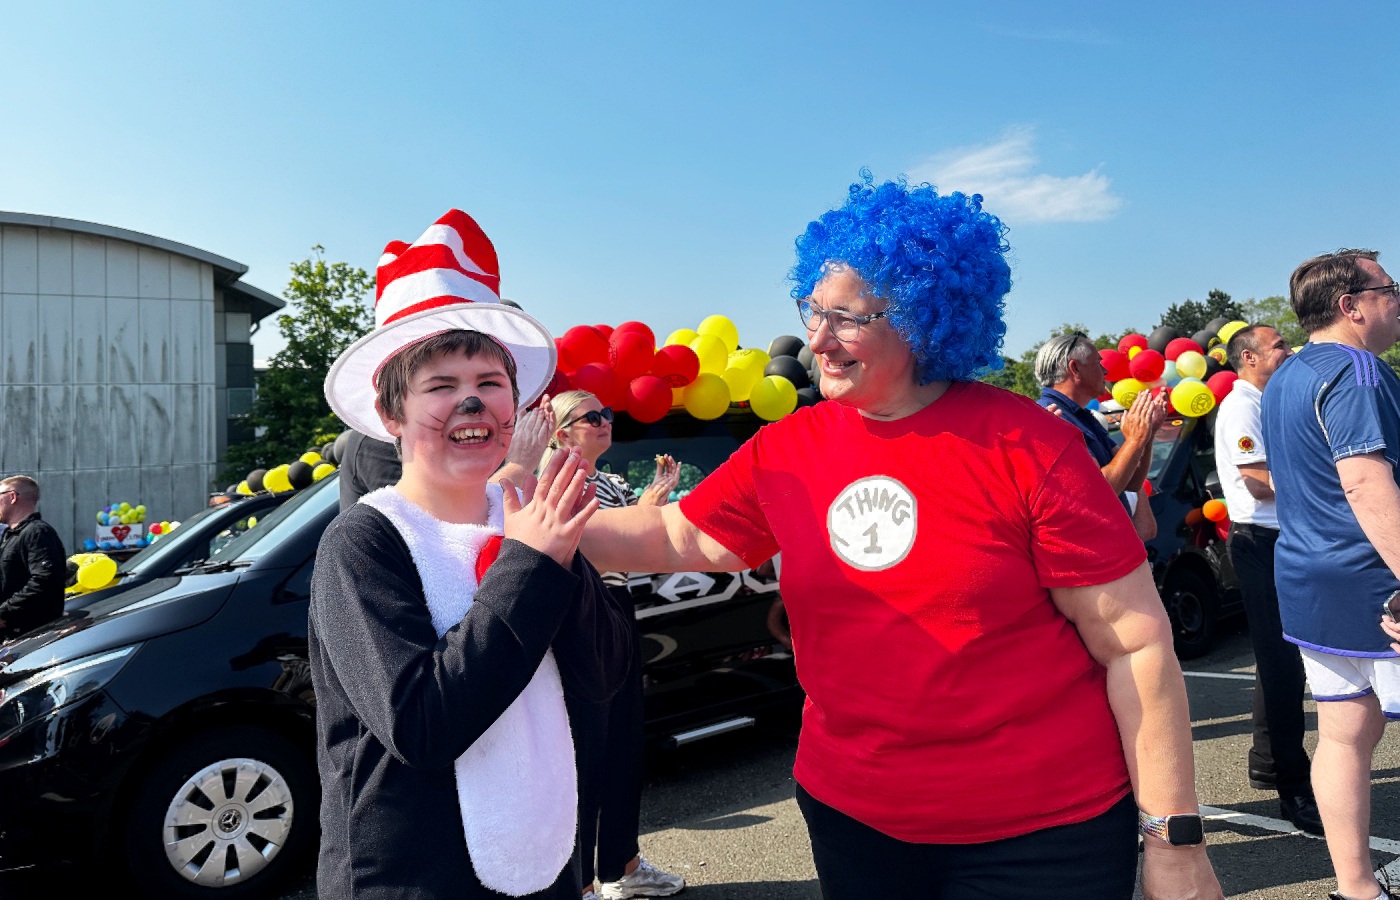 The kids with additional needs, life-limiting conditions and terminal illnesses were taken in a convoy through the city for a picnic in the Archerfield Walled Garden in East Lothian.